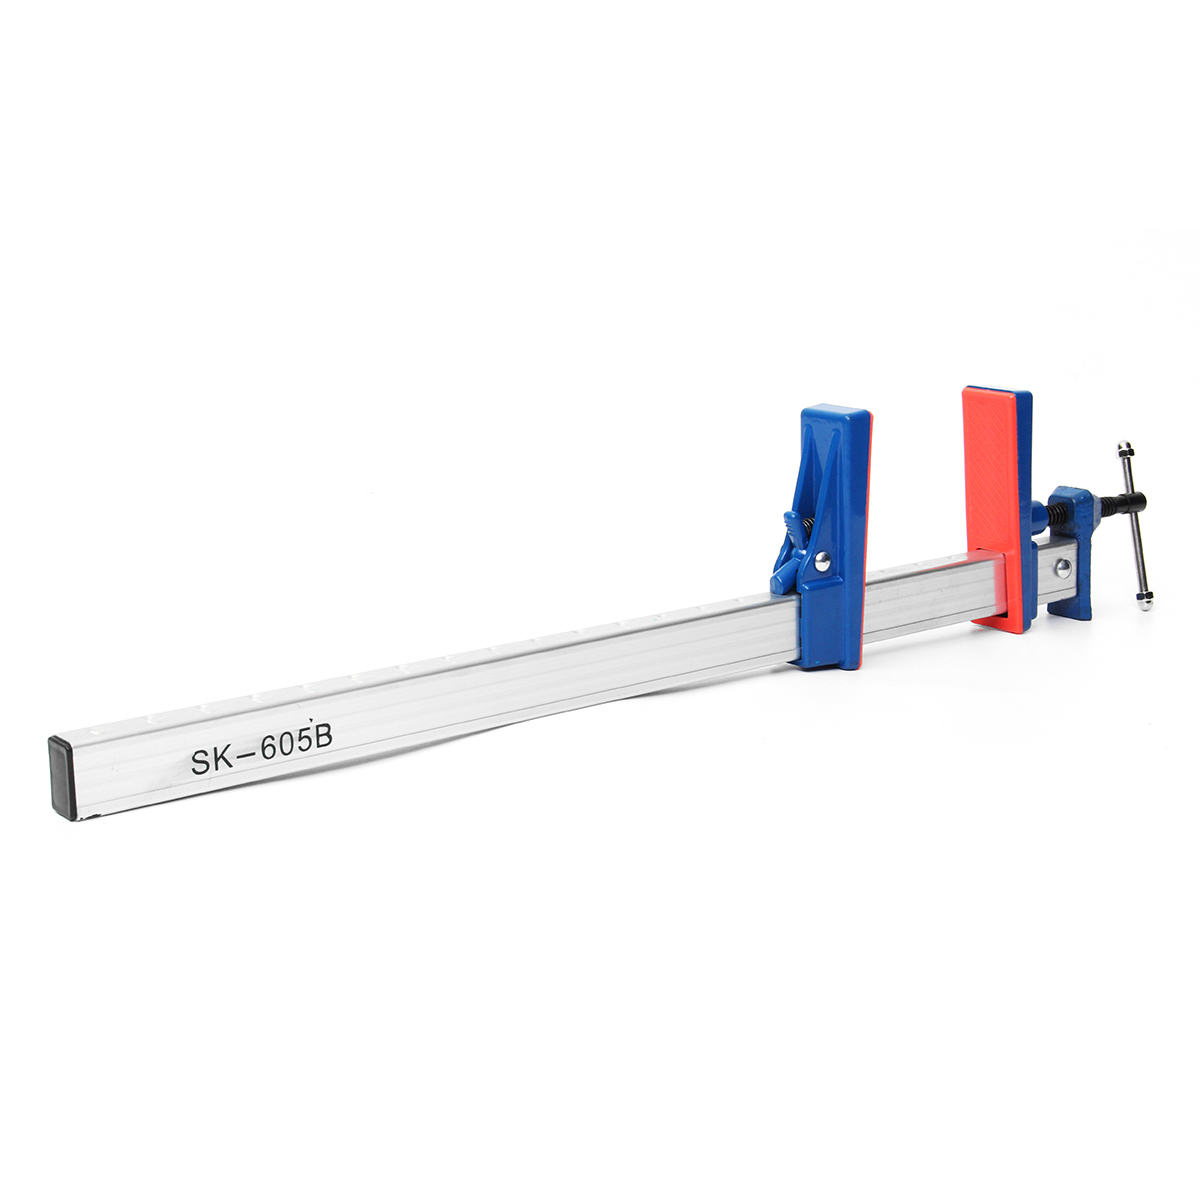 2436-Inch-Aluminum-F-Clamp-Bar-Heavy-Duty-Holder-Grip-Release-Parallel-Adjustable-Woodworking-Tool-1361735-7